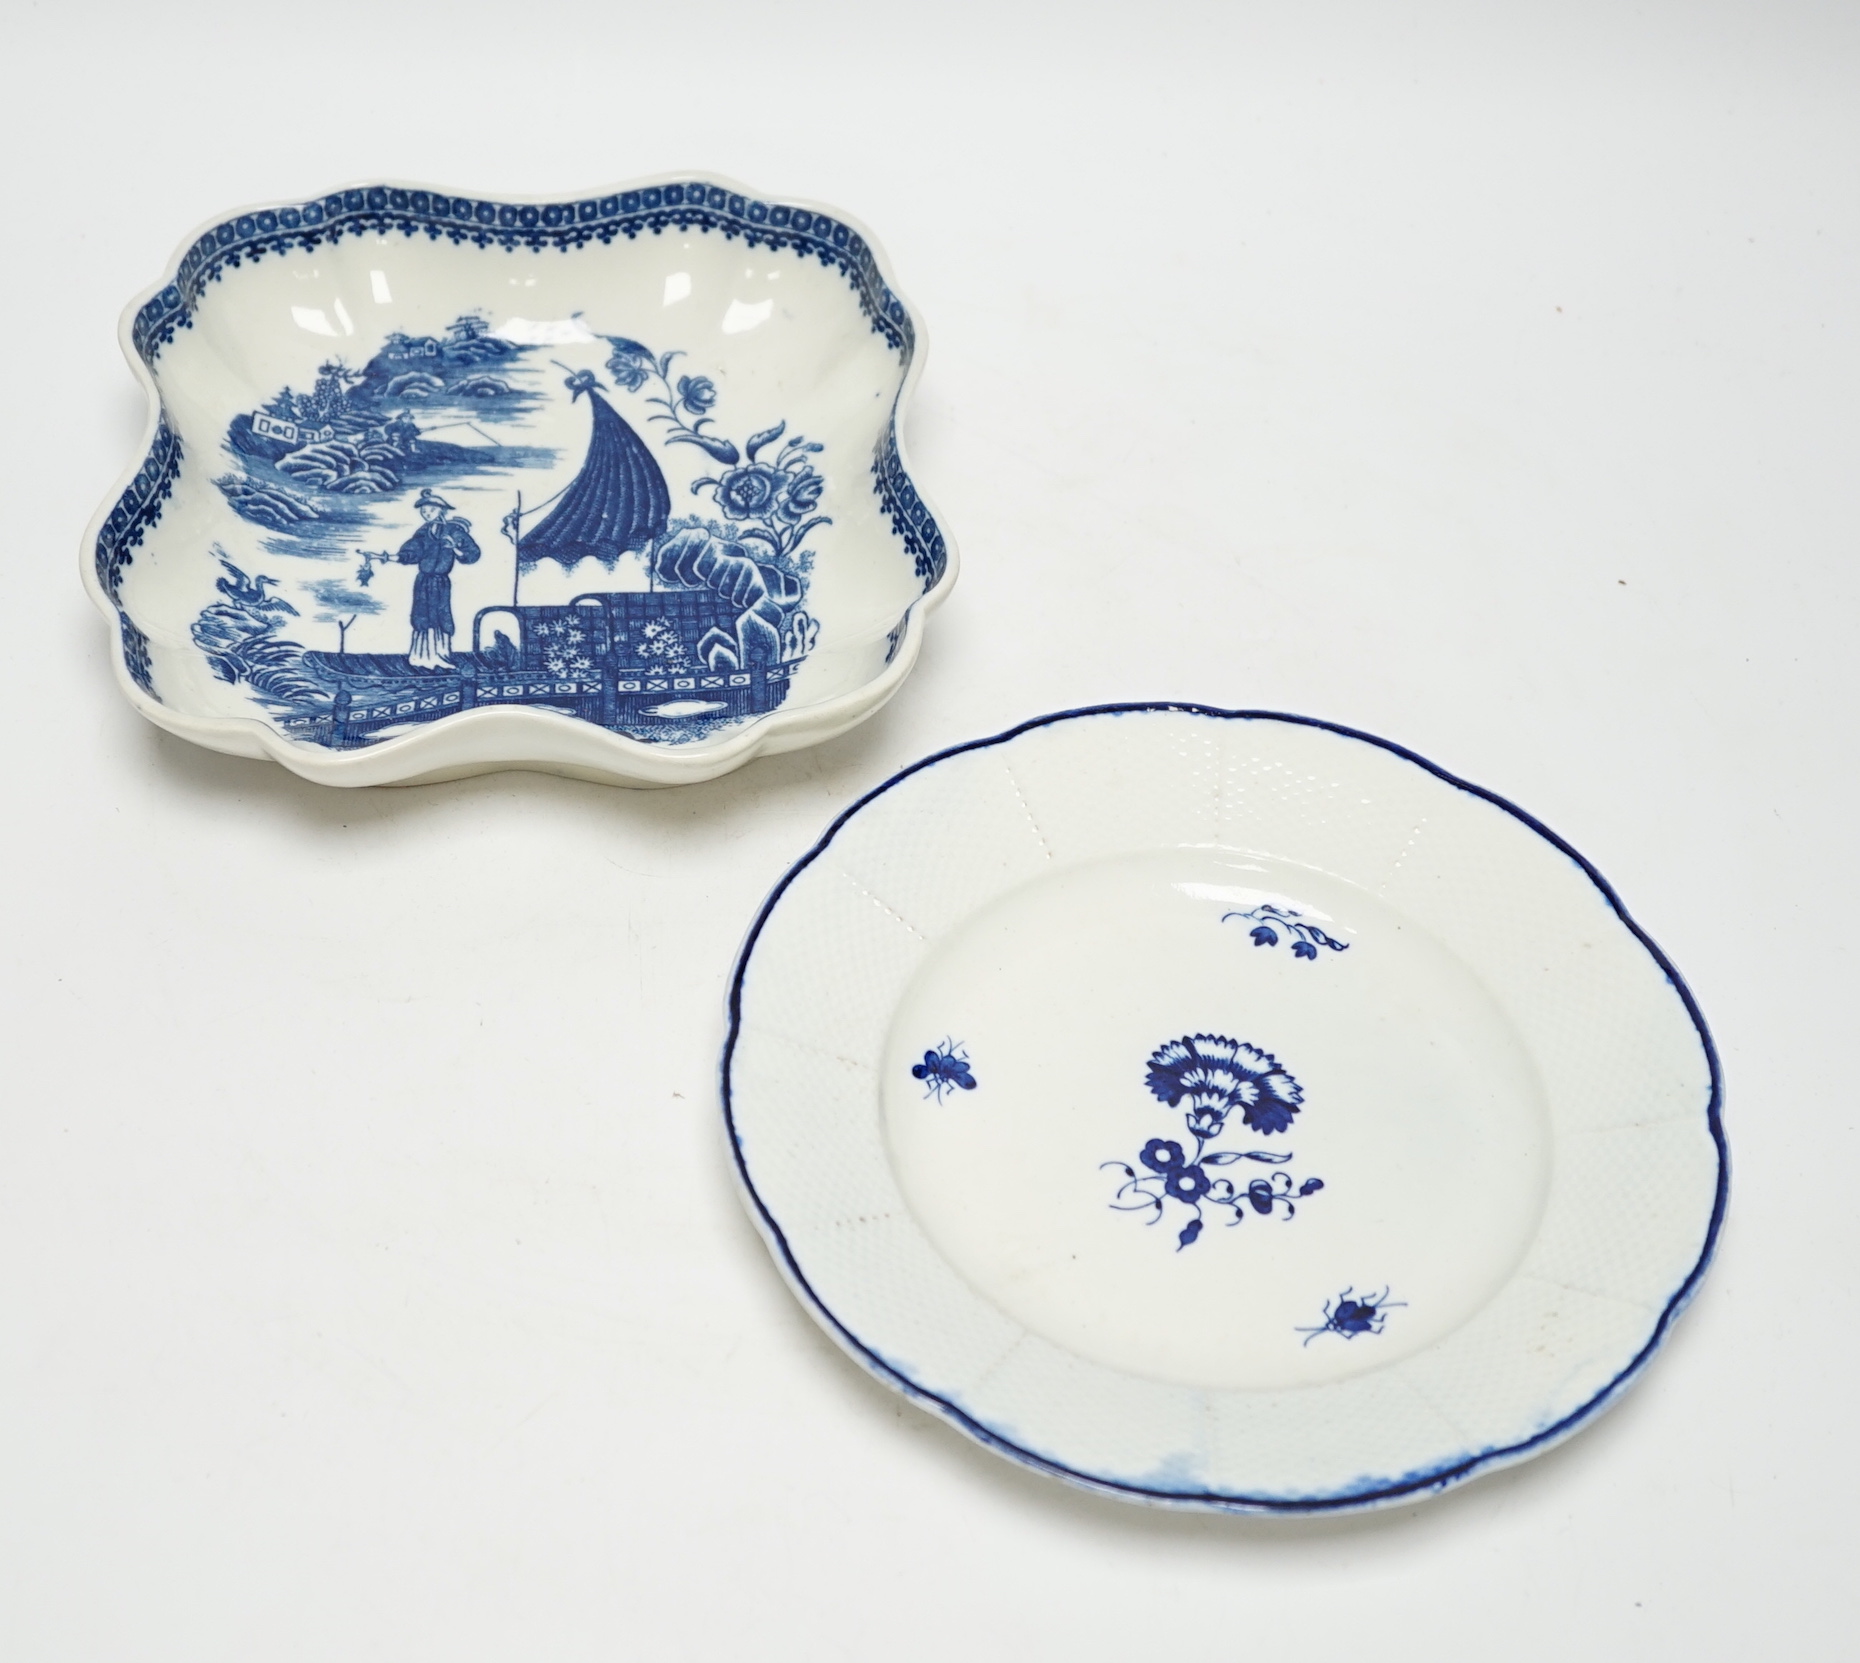 A Caughley carnation pattern plate, c.1765-70 and a fisherman pattern dessert dish c.1780, plate 21.5cm